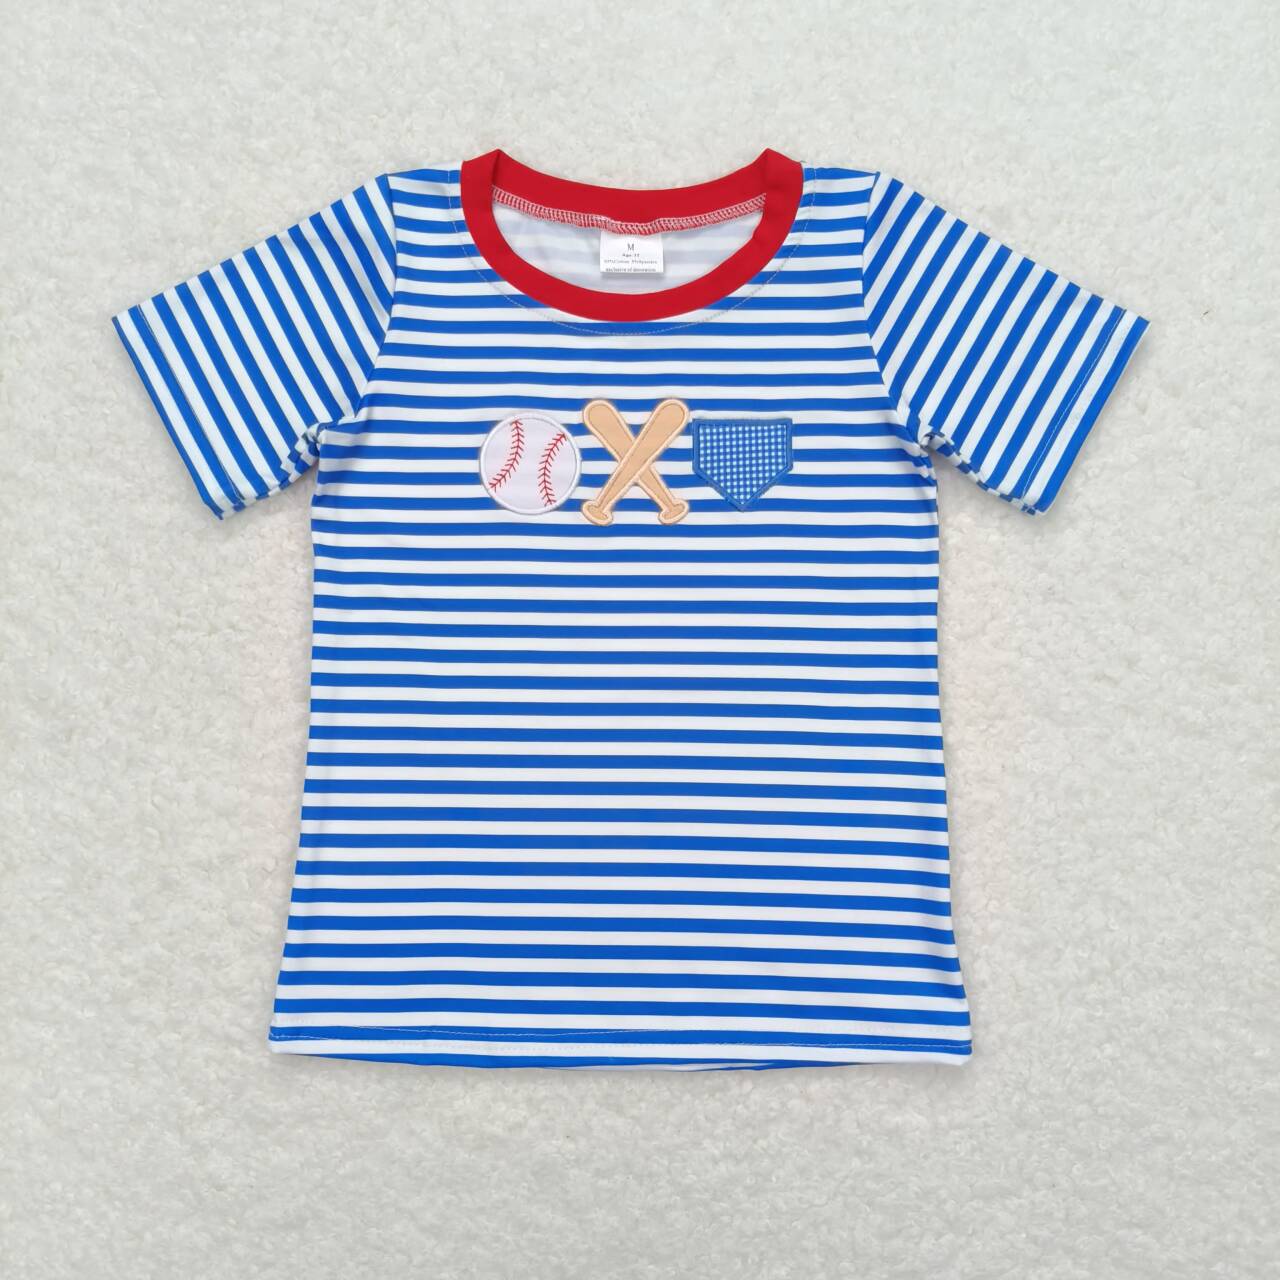 GBO0355 Baseball Embroidery Stripes Top Red Shorts Baby Boys Summer Bummie Set